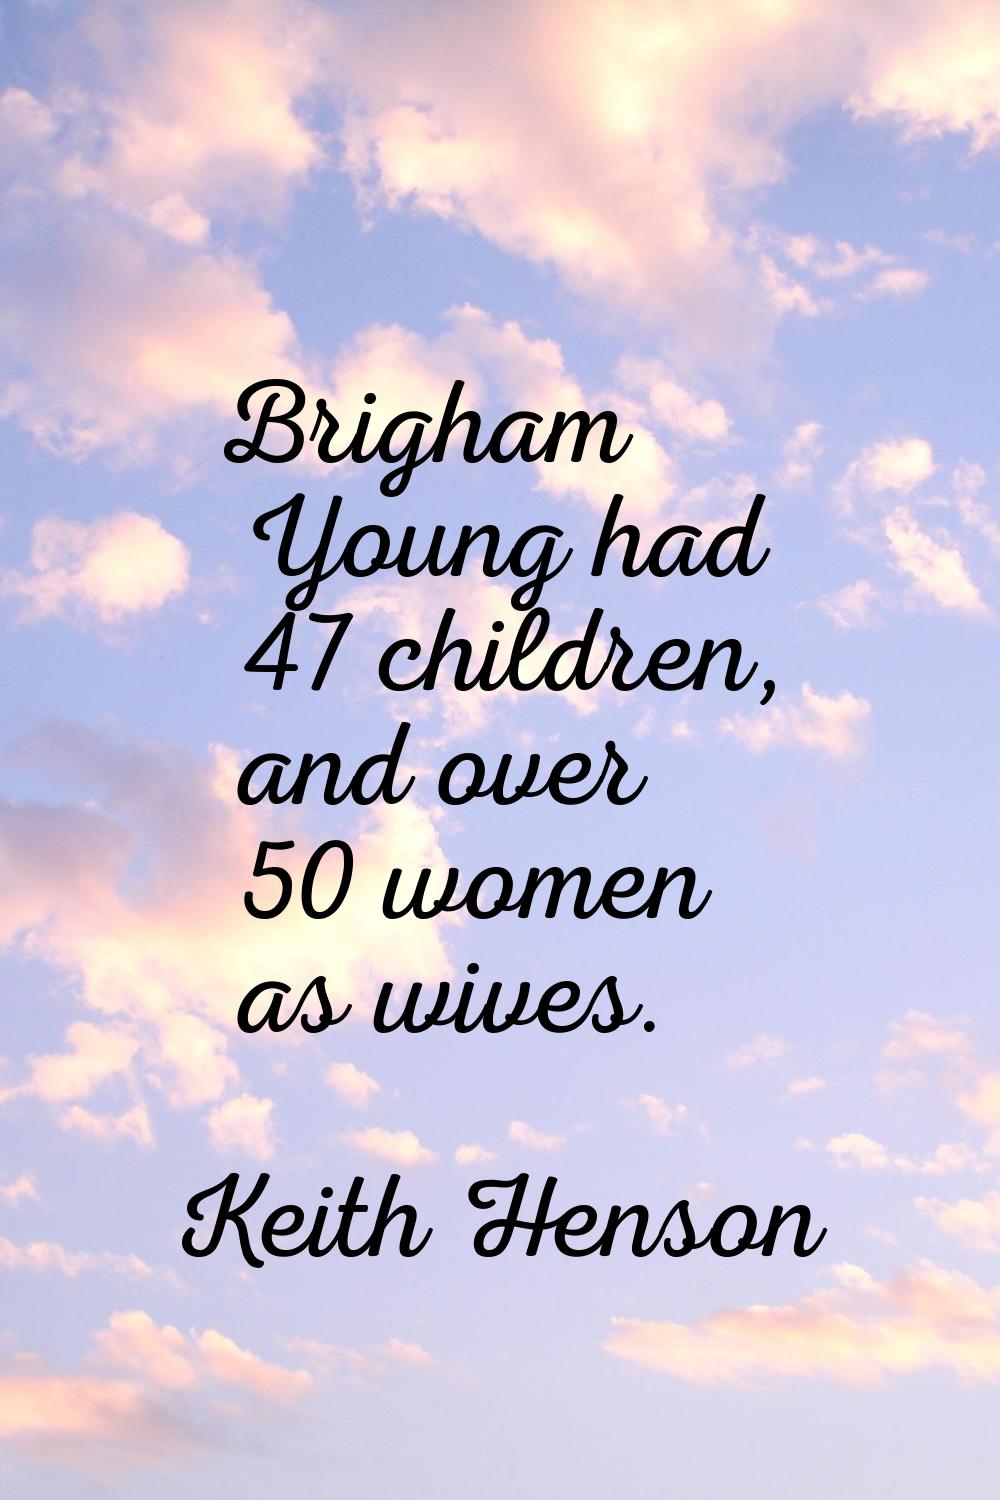 Brigham Young had 47 children, and over 50 women as wives.